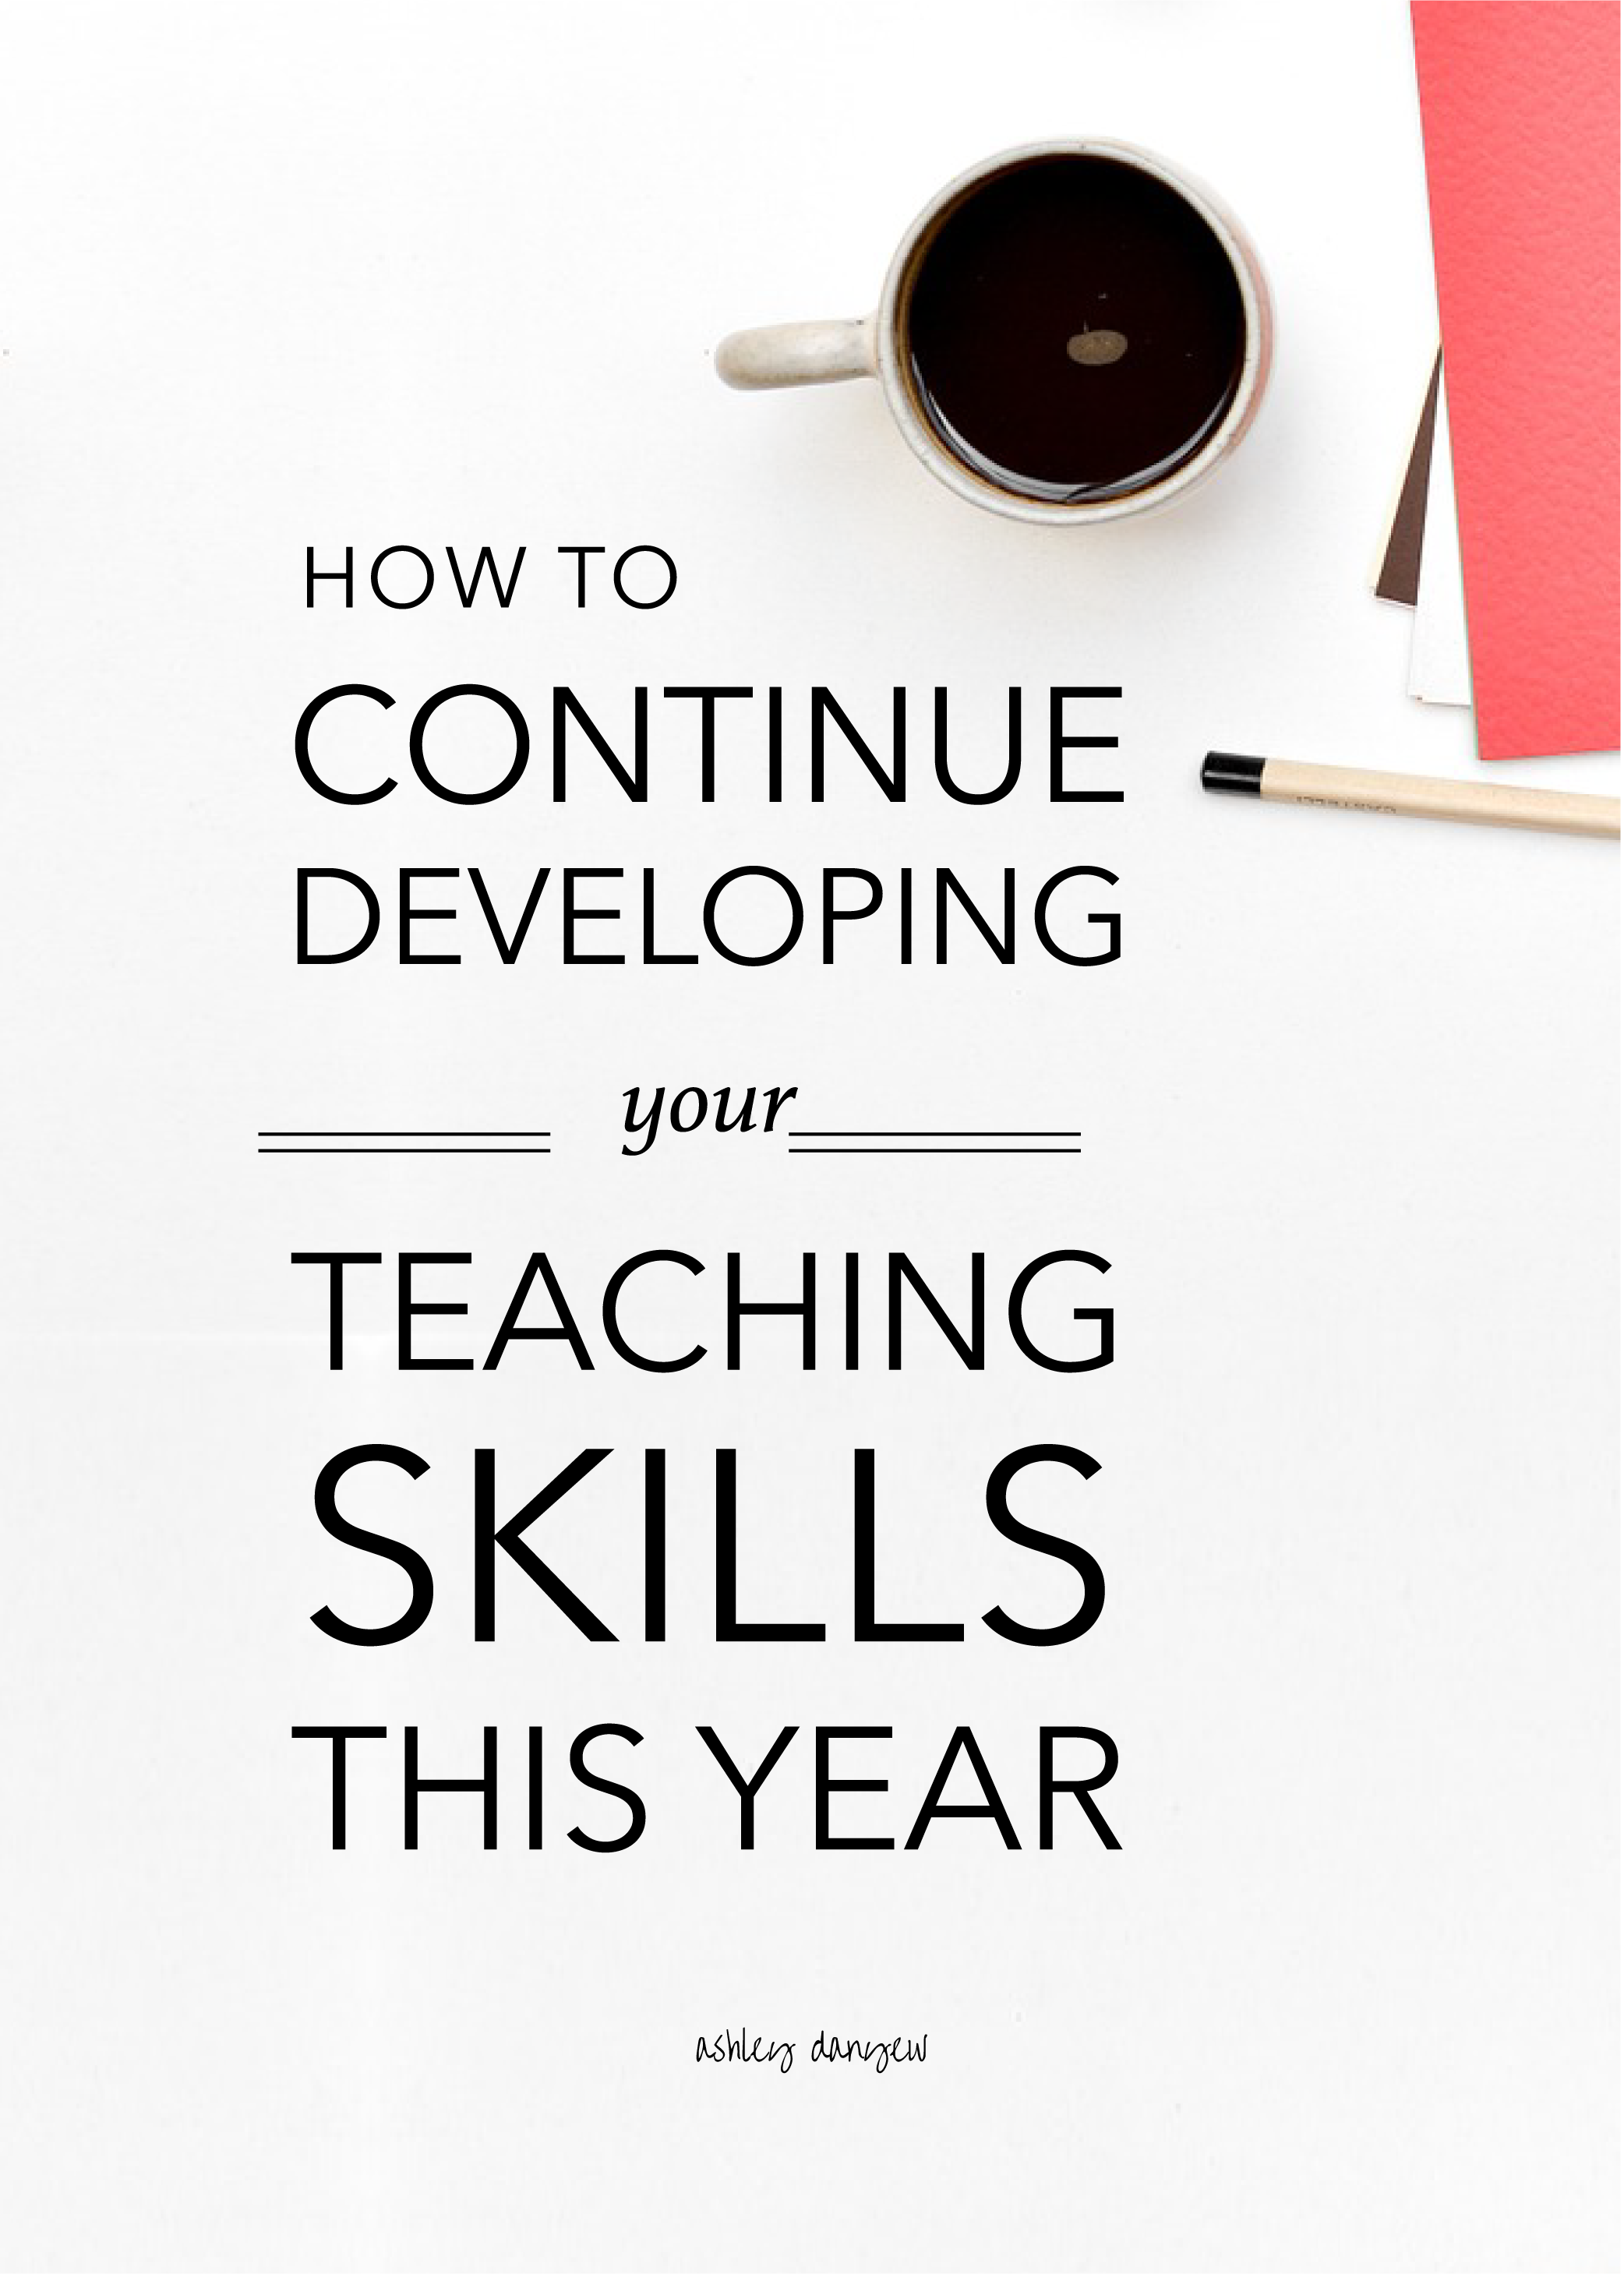 Copy of How to Continue Developing Your Teaching Skills This Year